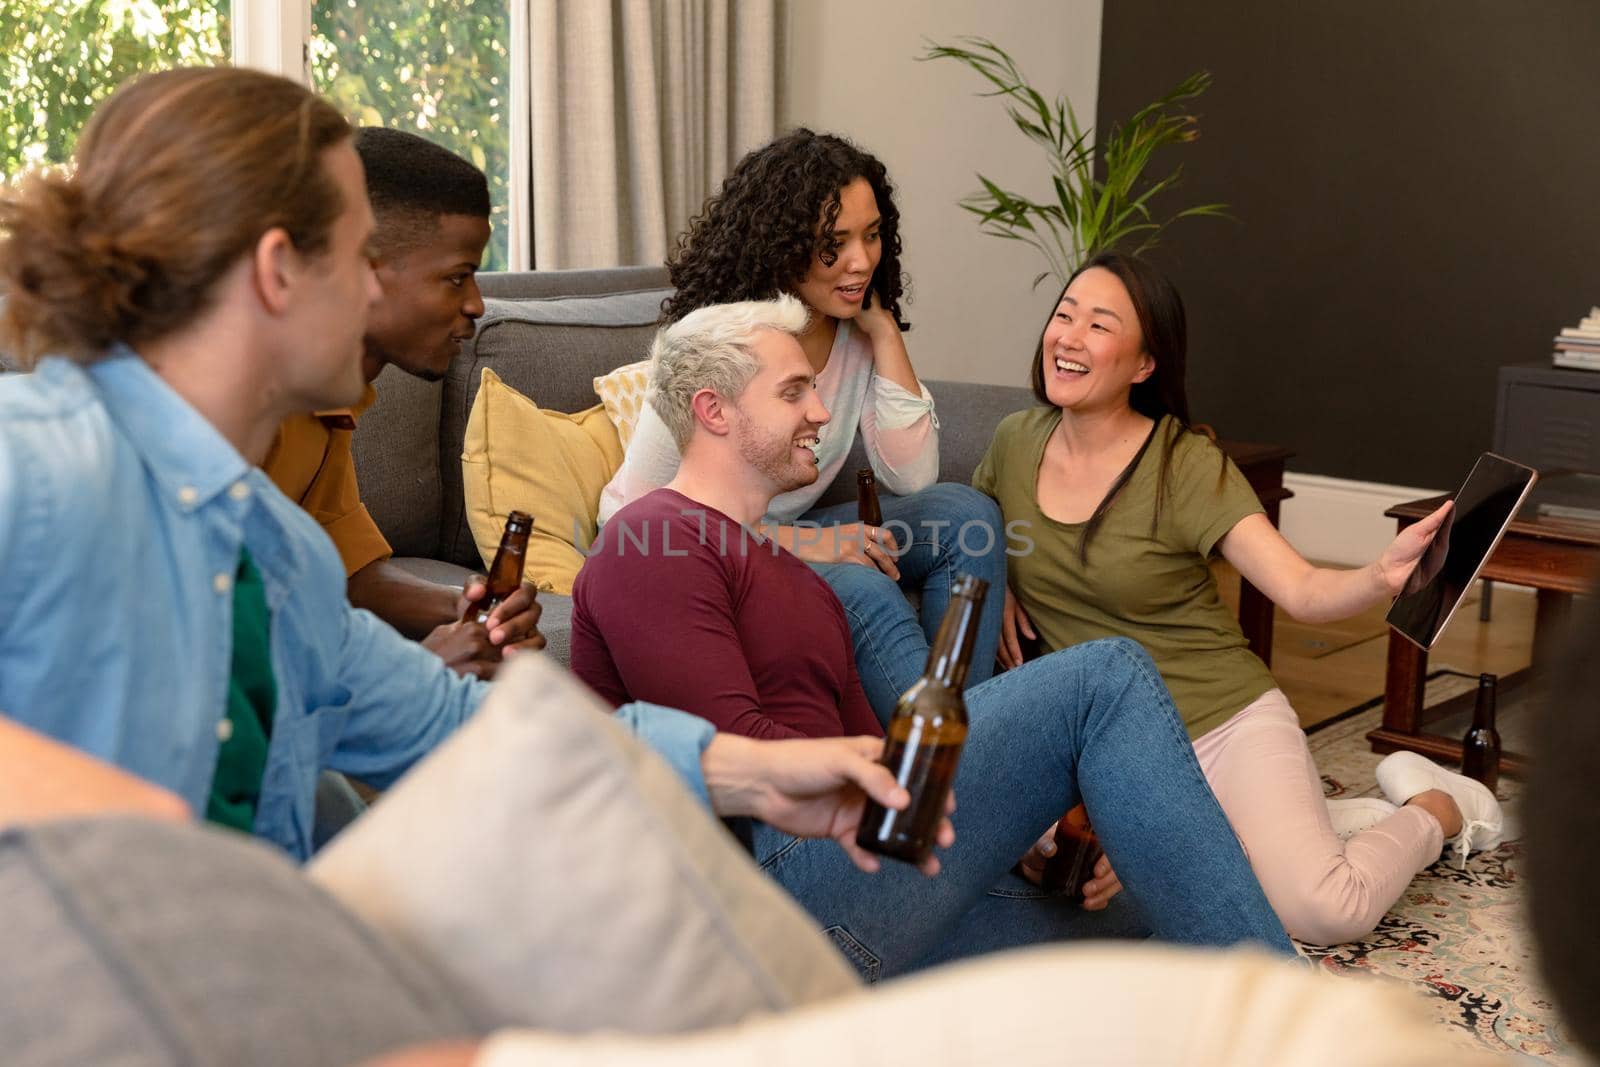 Group of happy diverse female and male friends drinking beer together and using tablet. socialising with friends at home.